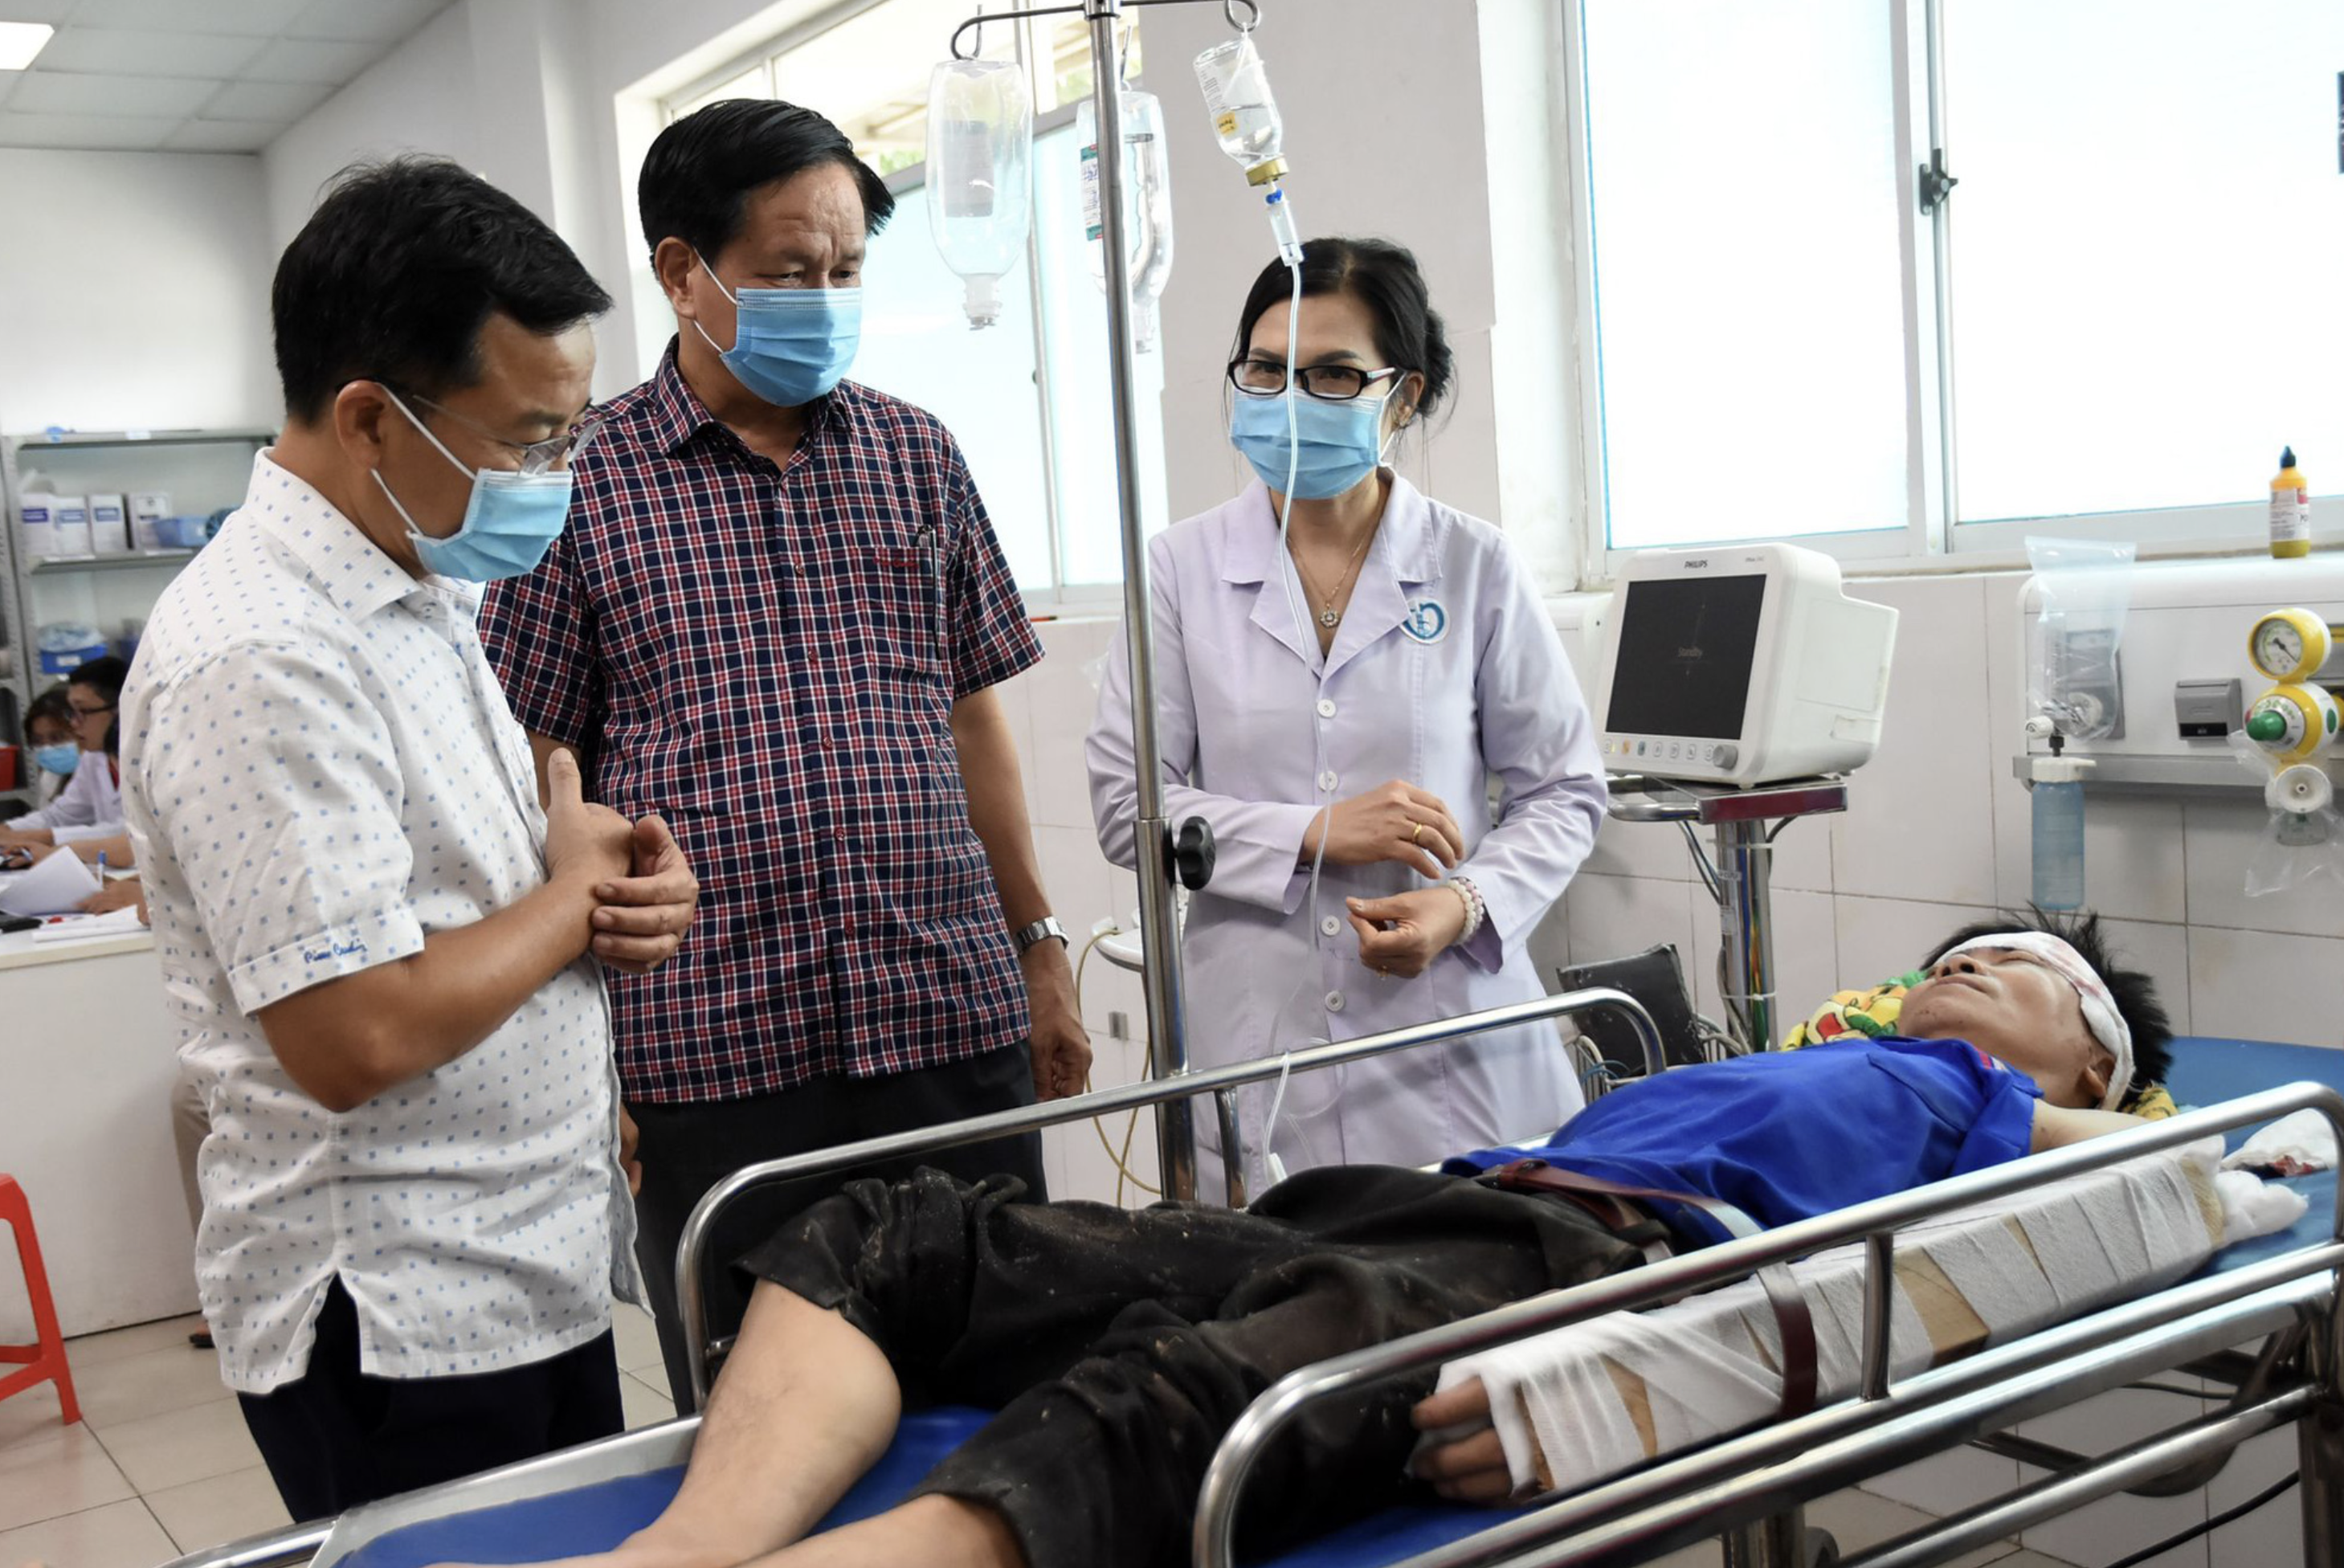 A worker injured in a boiler blast receives treatment at Thong Nhat General Hospital in Dong Nai Province, southern Vietnam. Photo: A Loc / Tuoi Tre